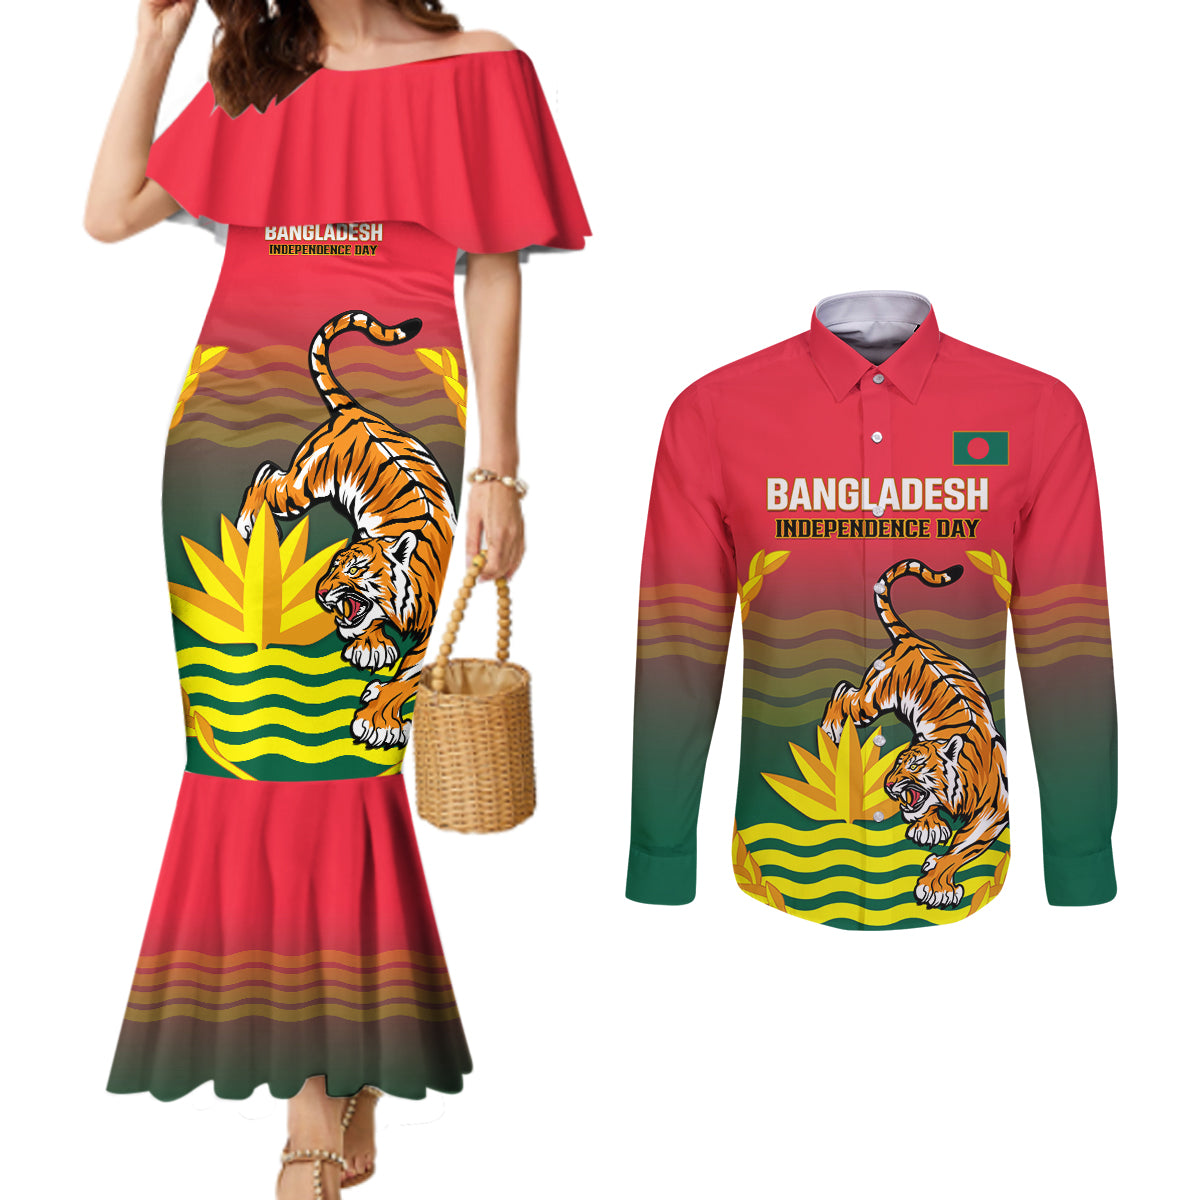 Bangladesh Independence Day Couples Matching Mermaid Dress and Long Sleeve Button Shirt Royal Bengal Tiger With Coat Of Arms